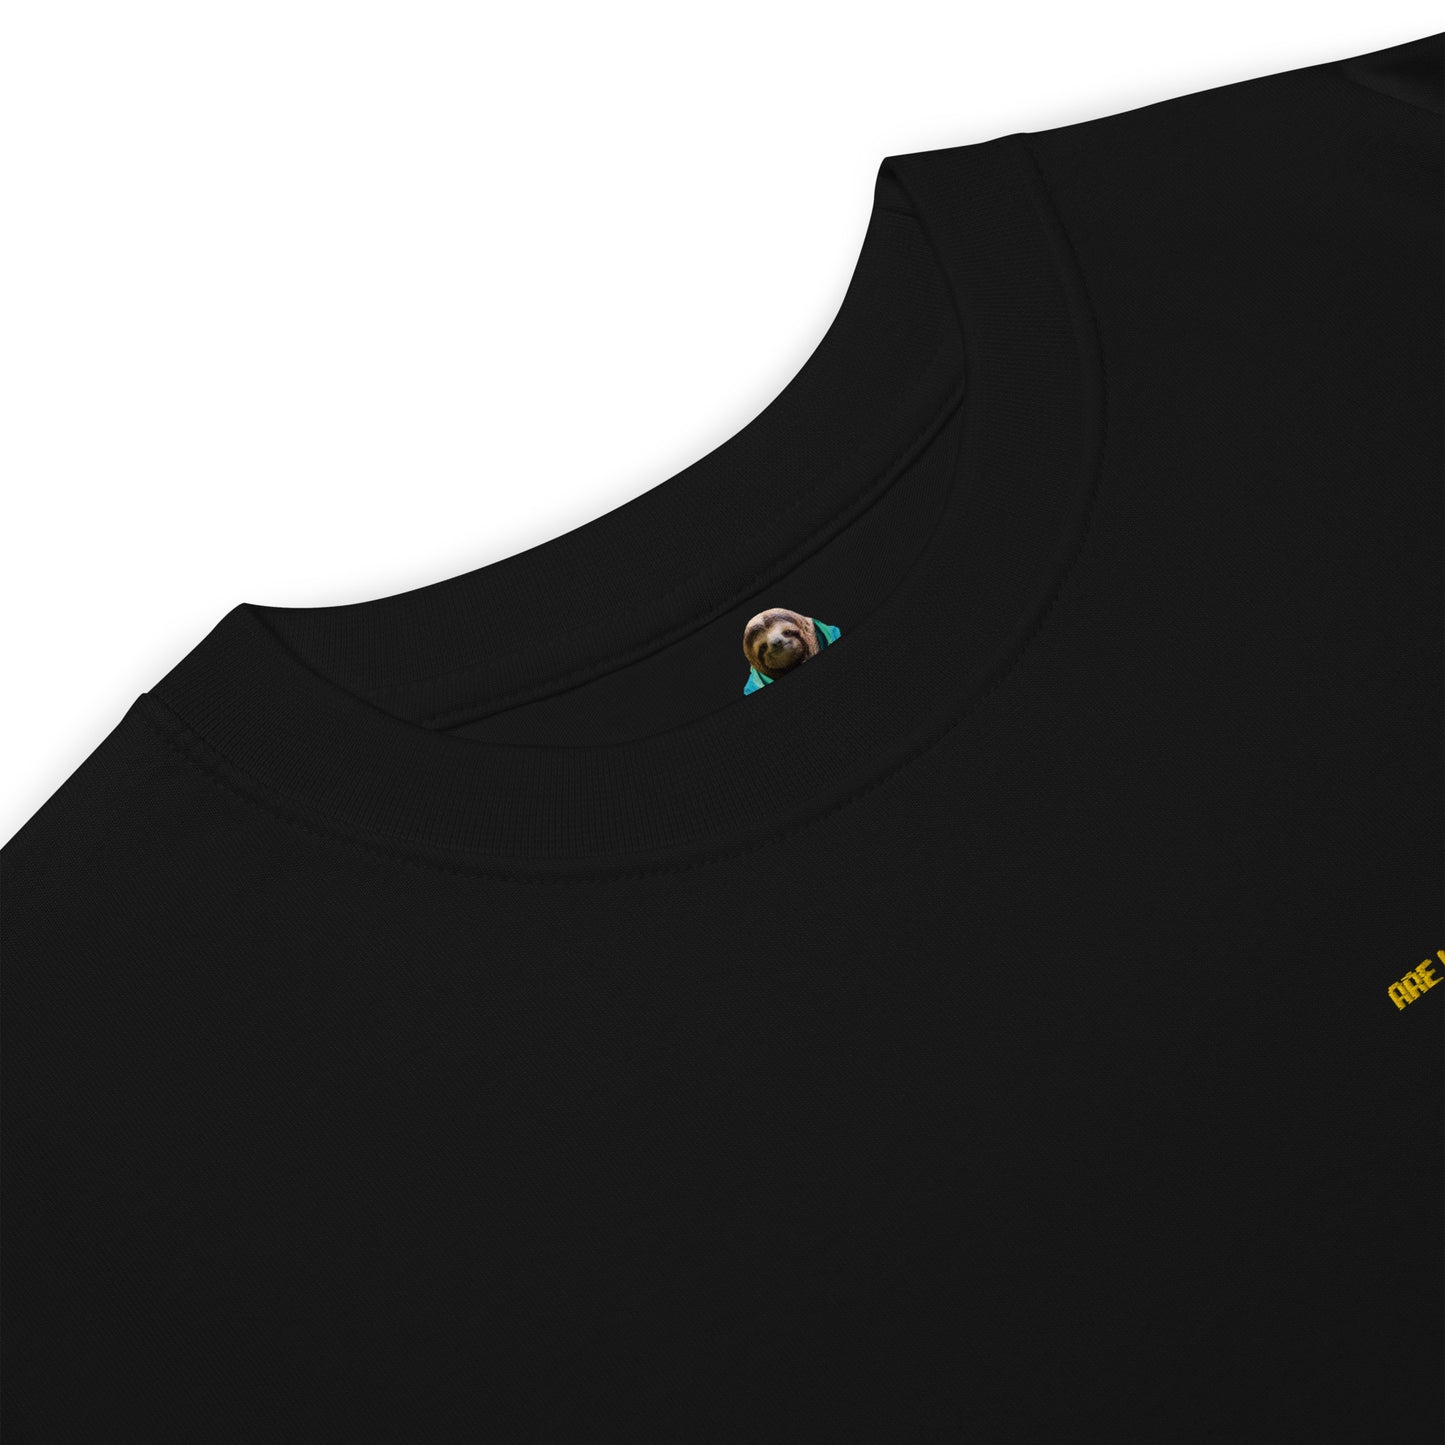 Embroidered Left Chest, Printed Back Unisex Premium Heavyweight Tee / T-shirt "Simulation"